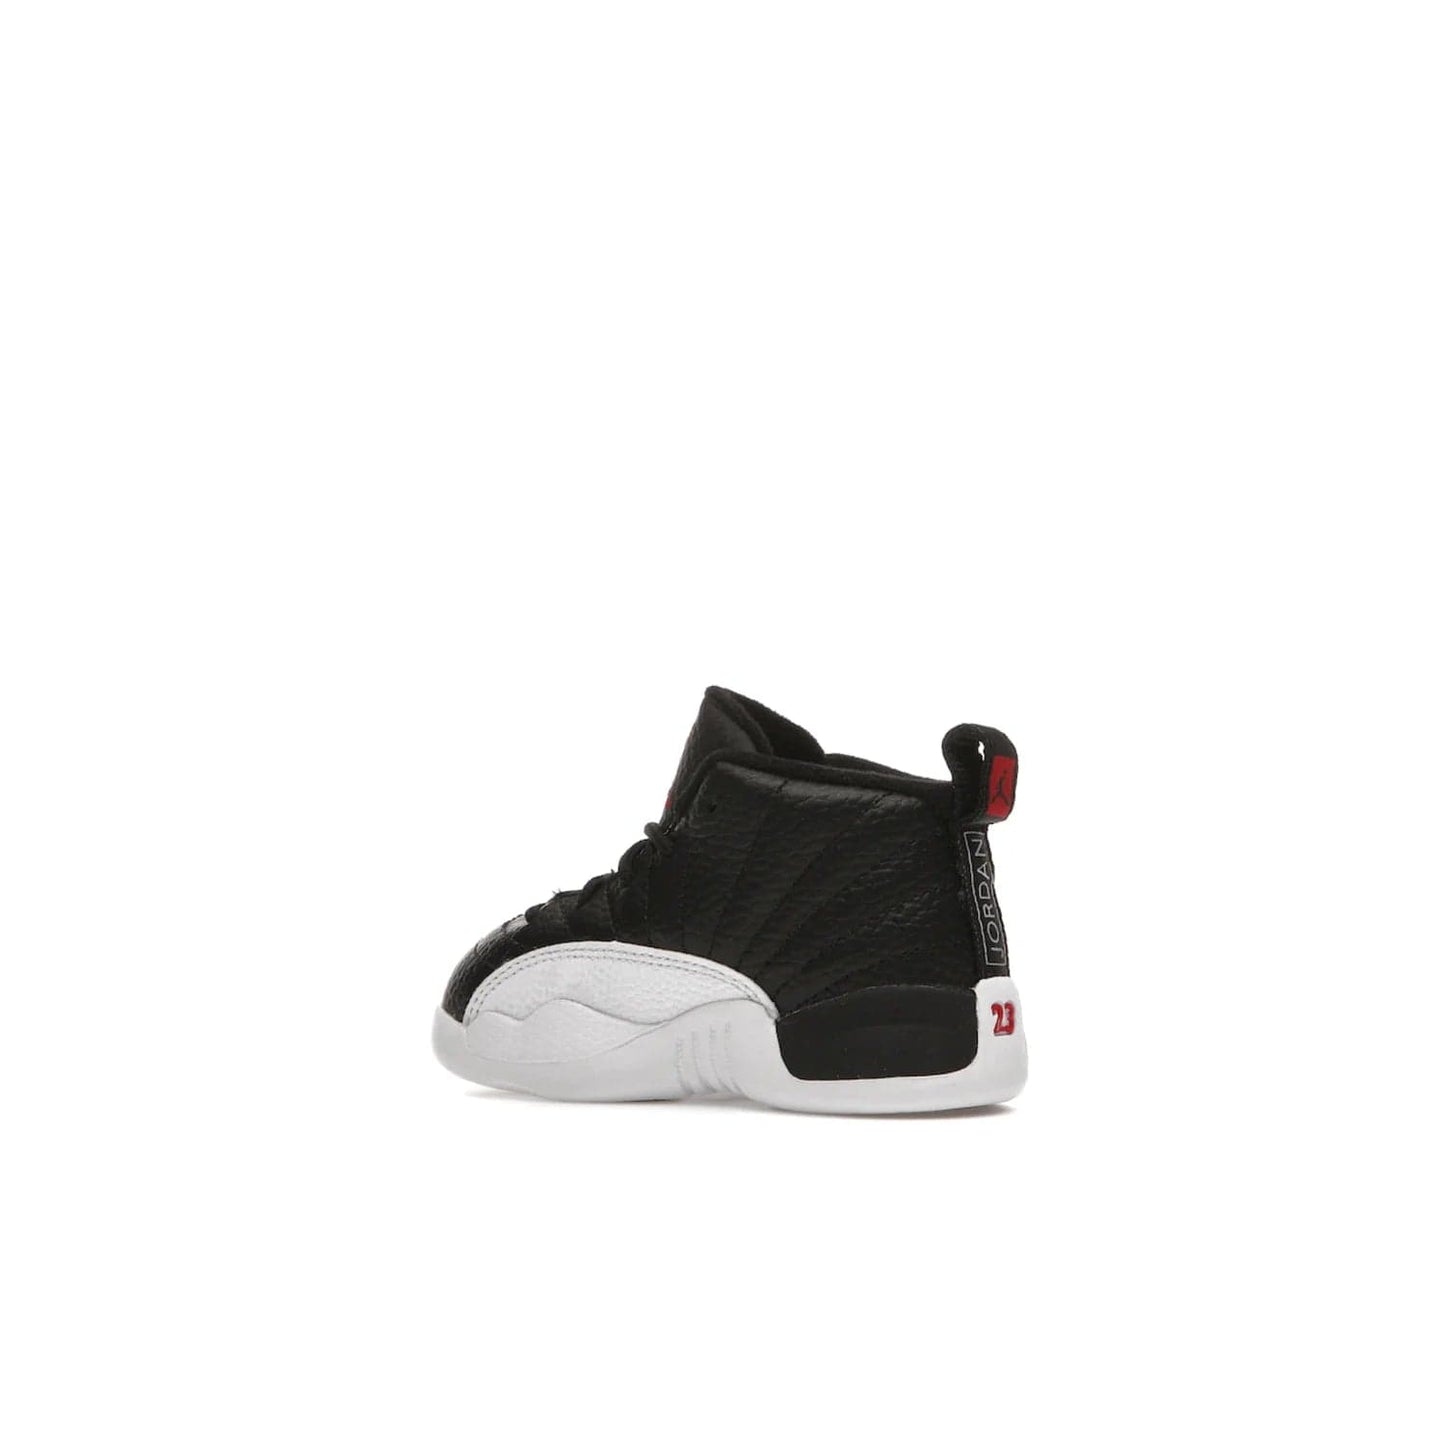 Jordan 12 Retro Playoffs (2022) (TD) - Image 22 - Only at www.BallersClubKickz.com - Stay stylish with the Air Jordan 12 Retro Playoffs 2022 (TD) toddler shoe. All-black upper with red and white accents plus subtle gold details. Bright white midsole and sole. Perfect for any outing or special event.